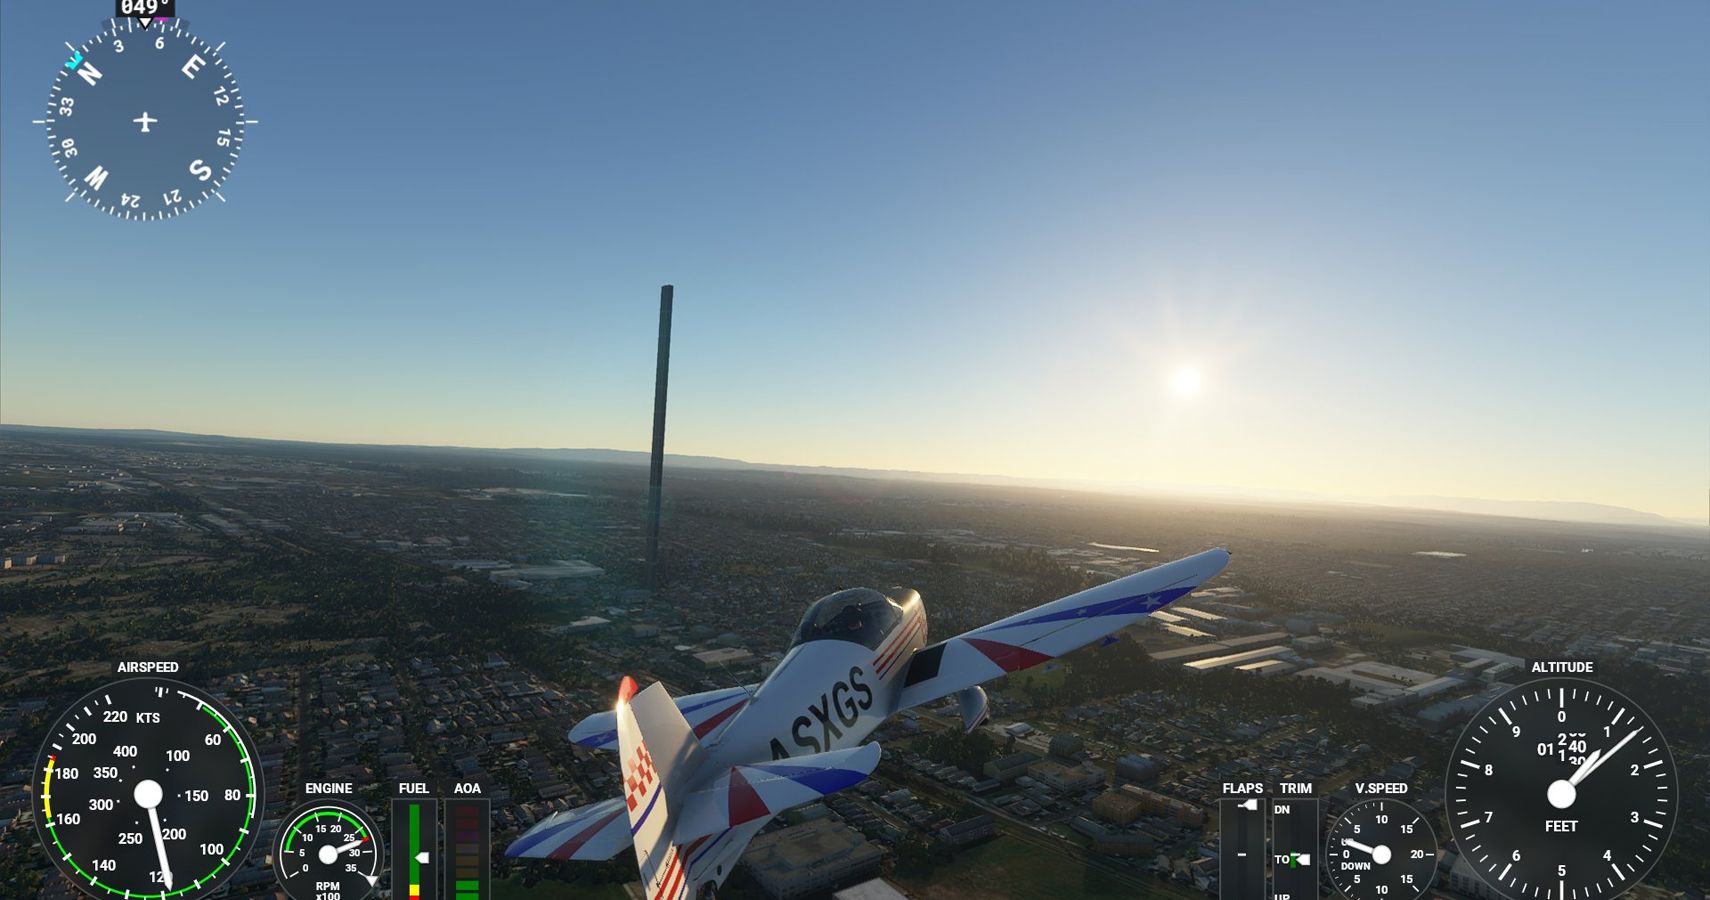 Visit The Melbourne Citadel In Microsoft Flight Simulator 2020 Thanks To A Typo